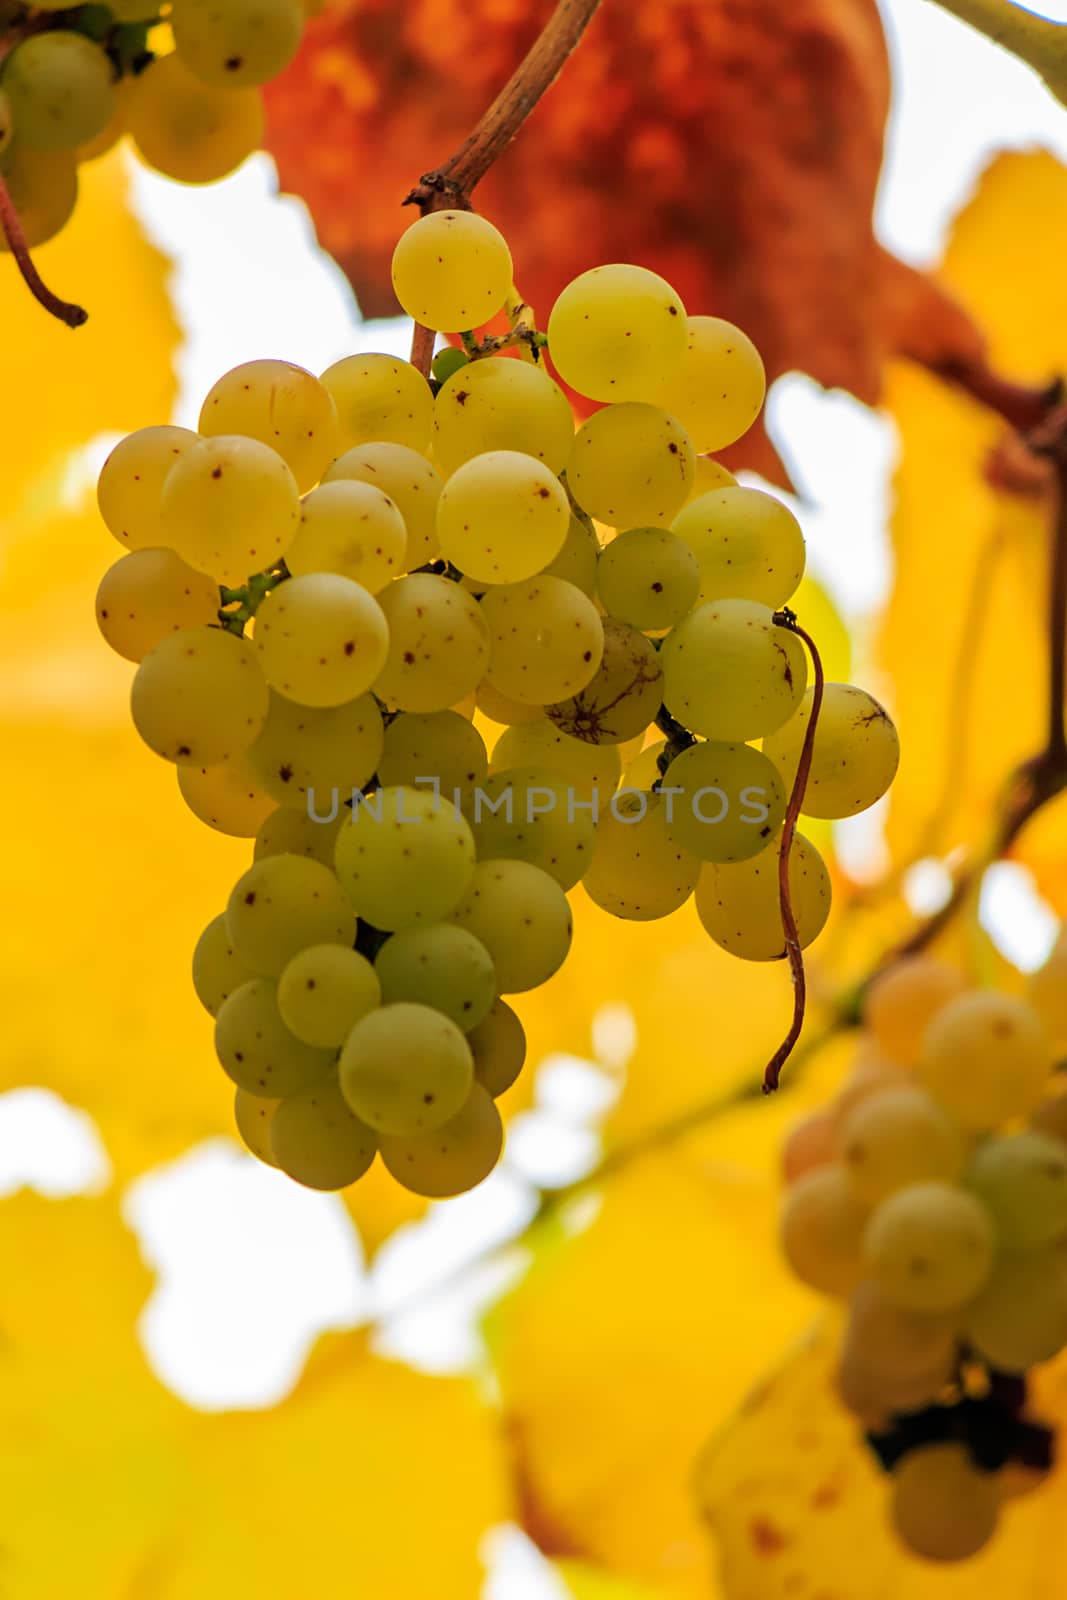 yellow grapes on vine leaves background by Pellinni